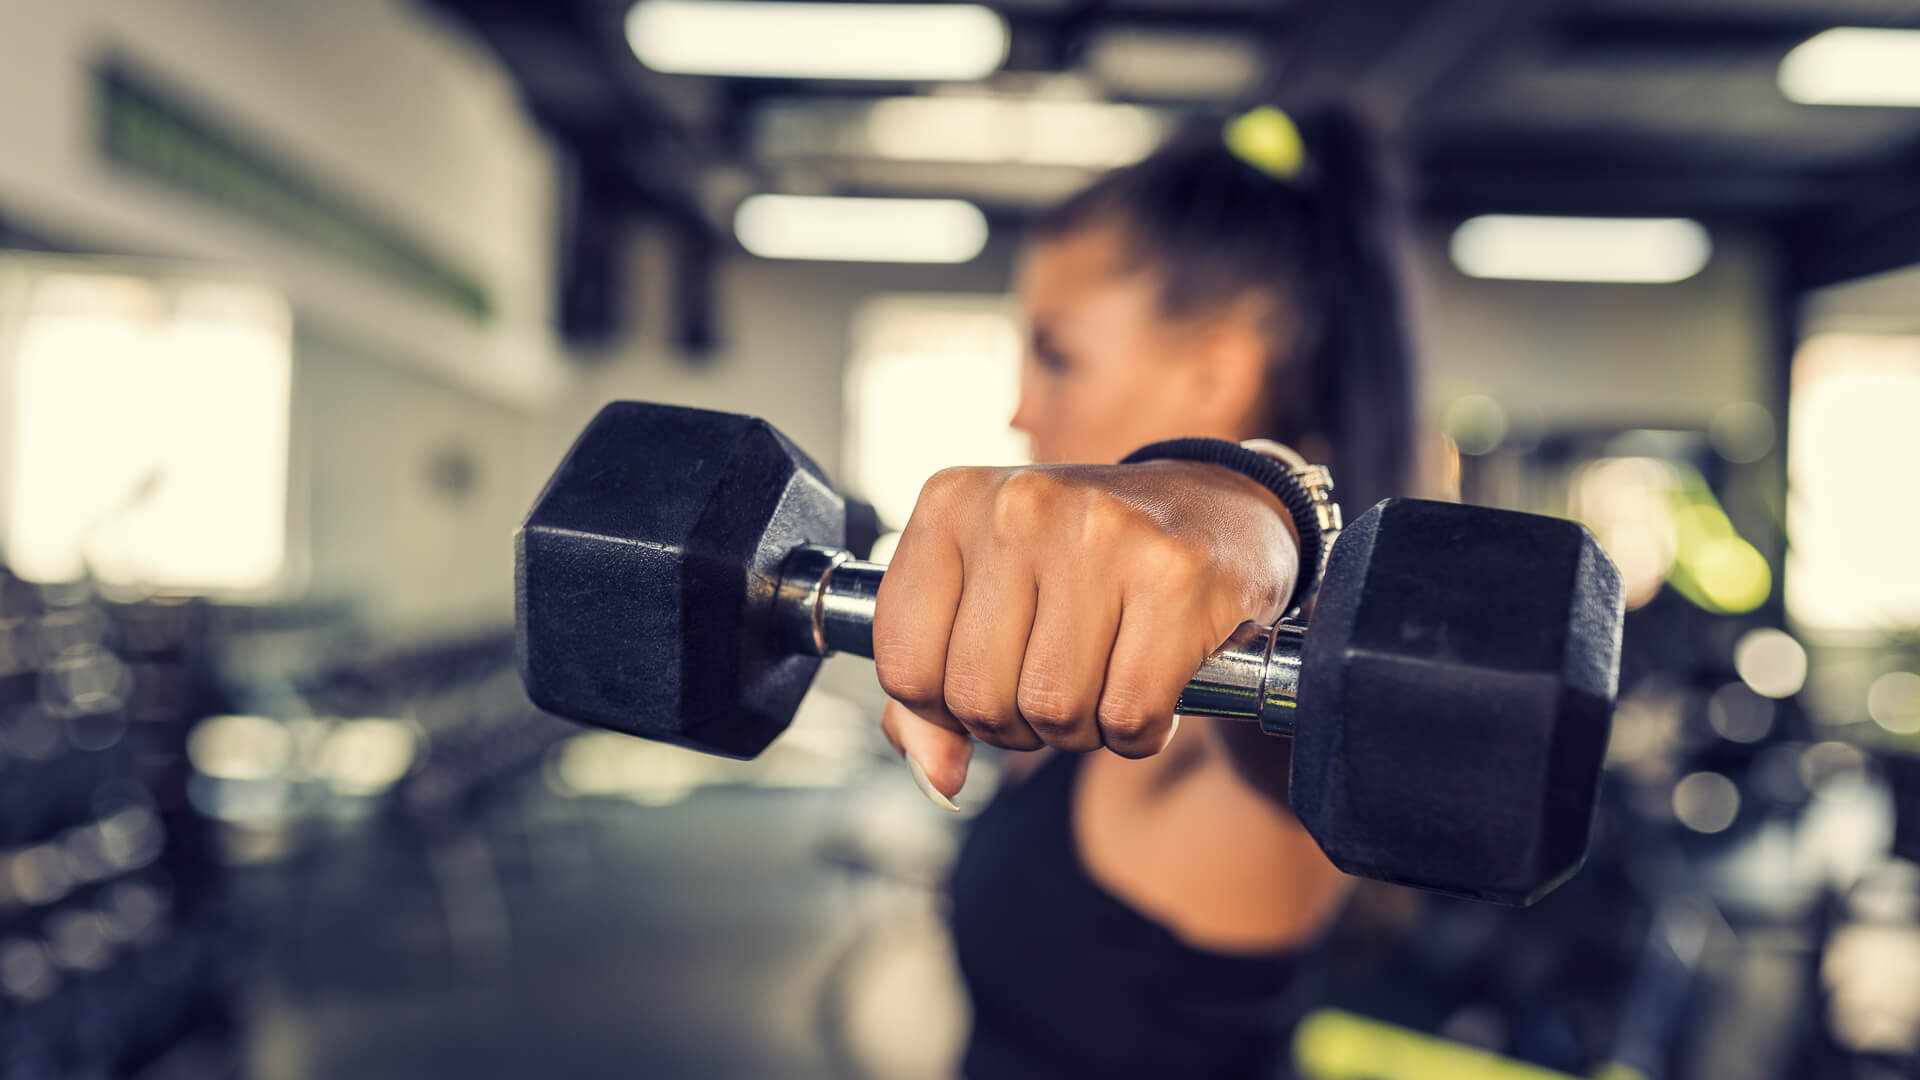 Gym Membership Information - Affordable Fitness